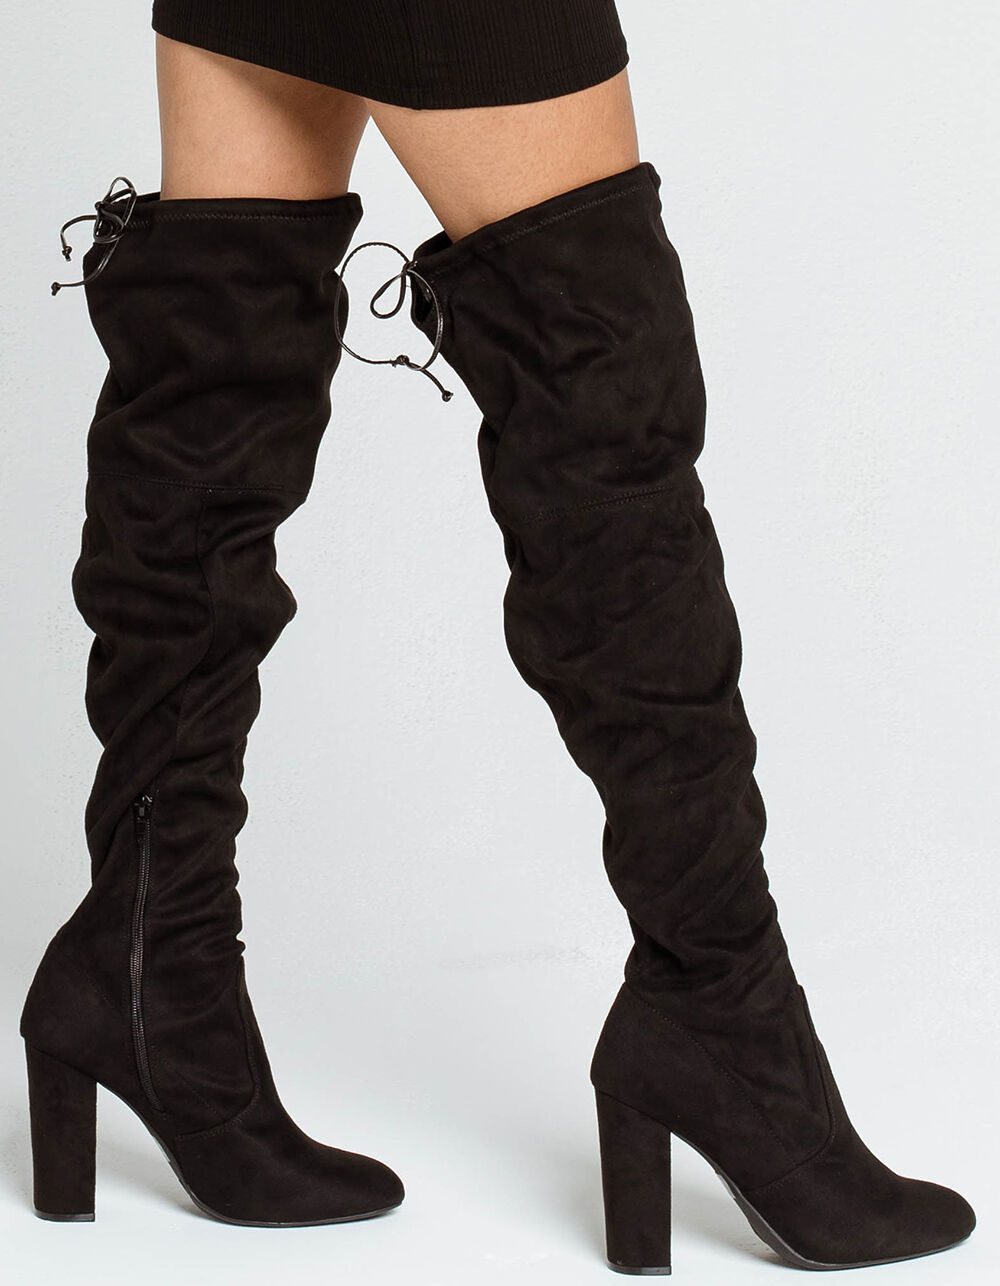 WILD DIVA Over The Knee Heeled Boots